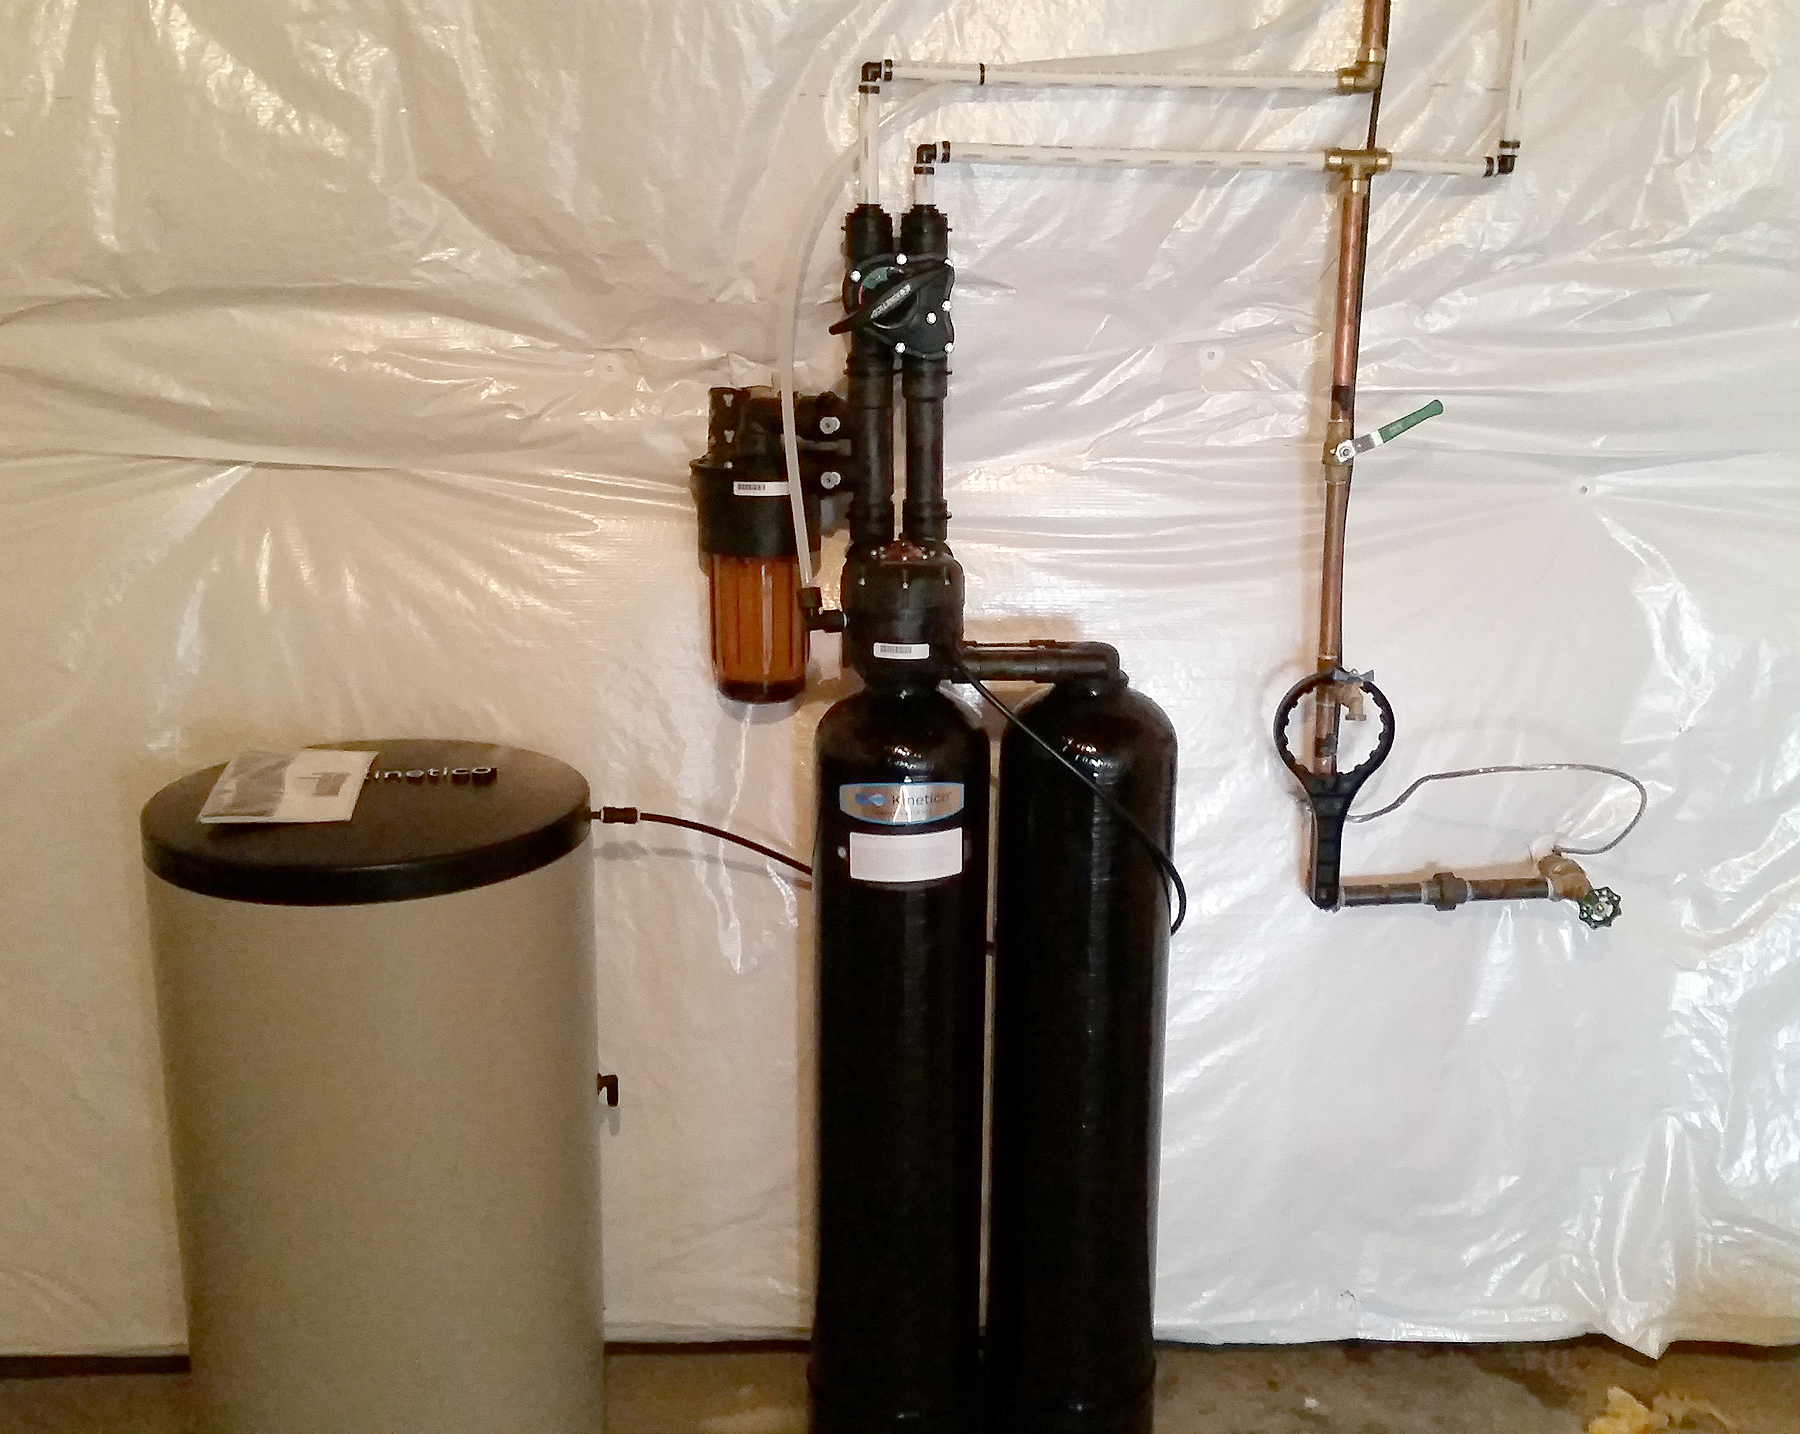 Kinetico's Entire home water softener installed in Port Byron, Illinois